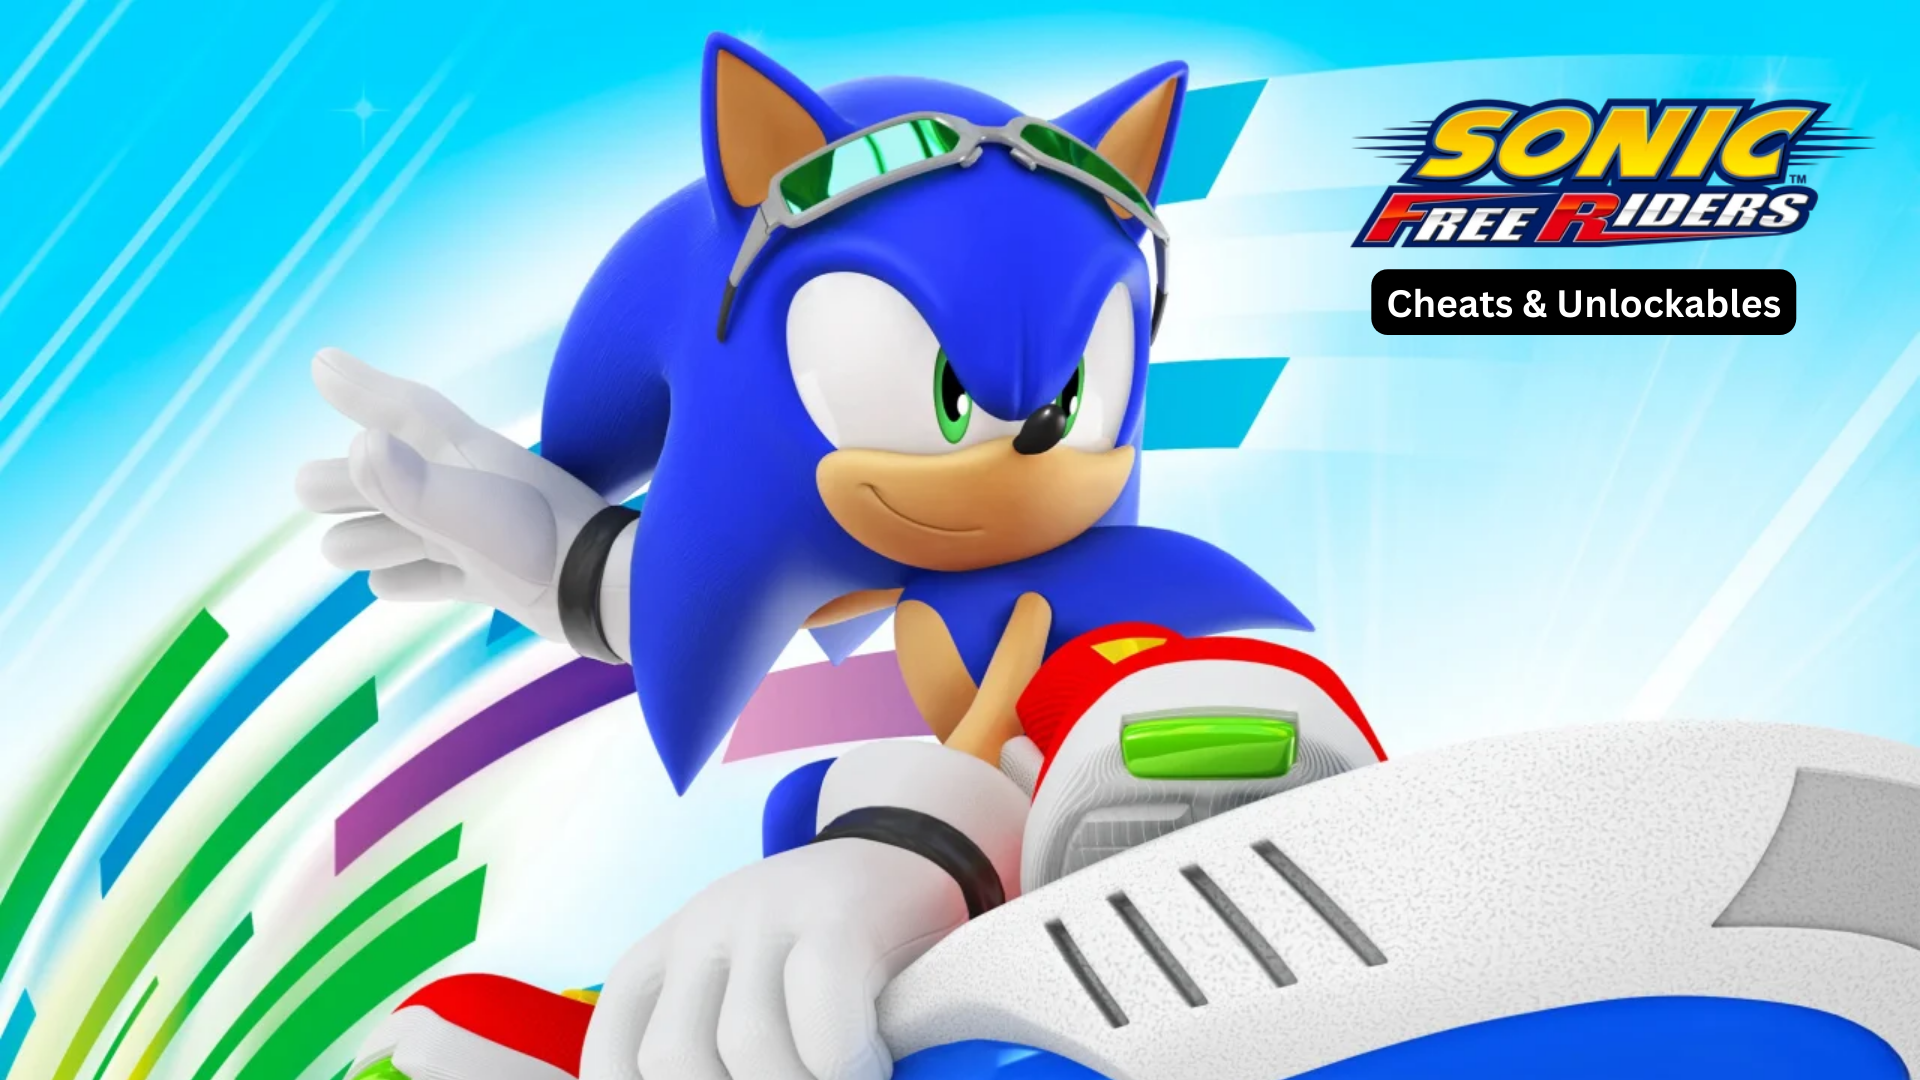 sonic free riders cheats and unlockables